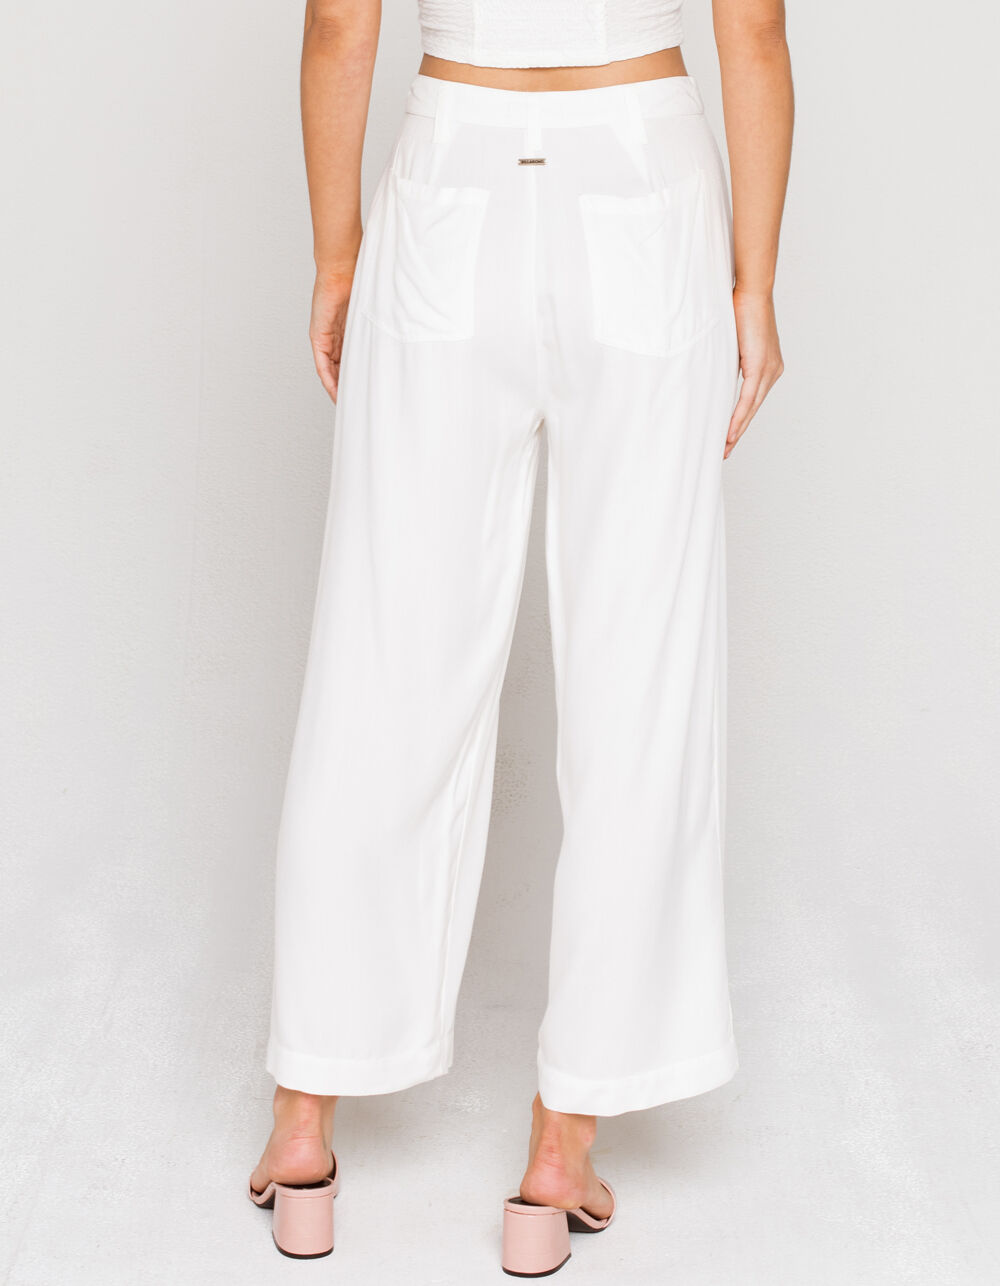 BILLABONG Casually Busy Womens Pants - WHITE | Tillys